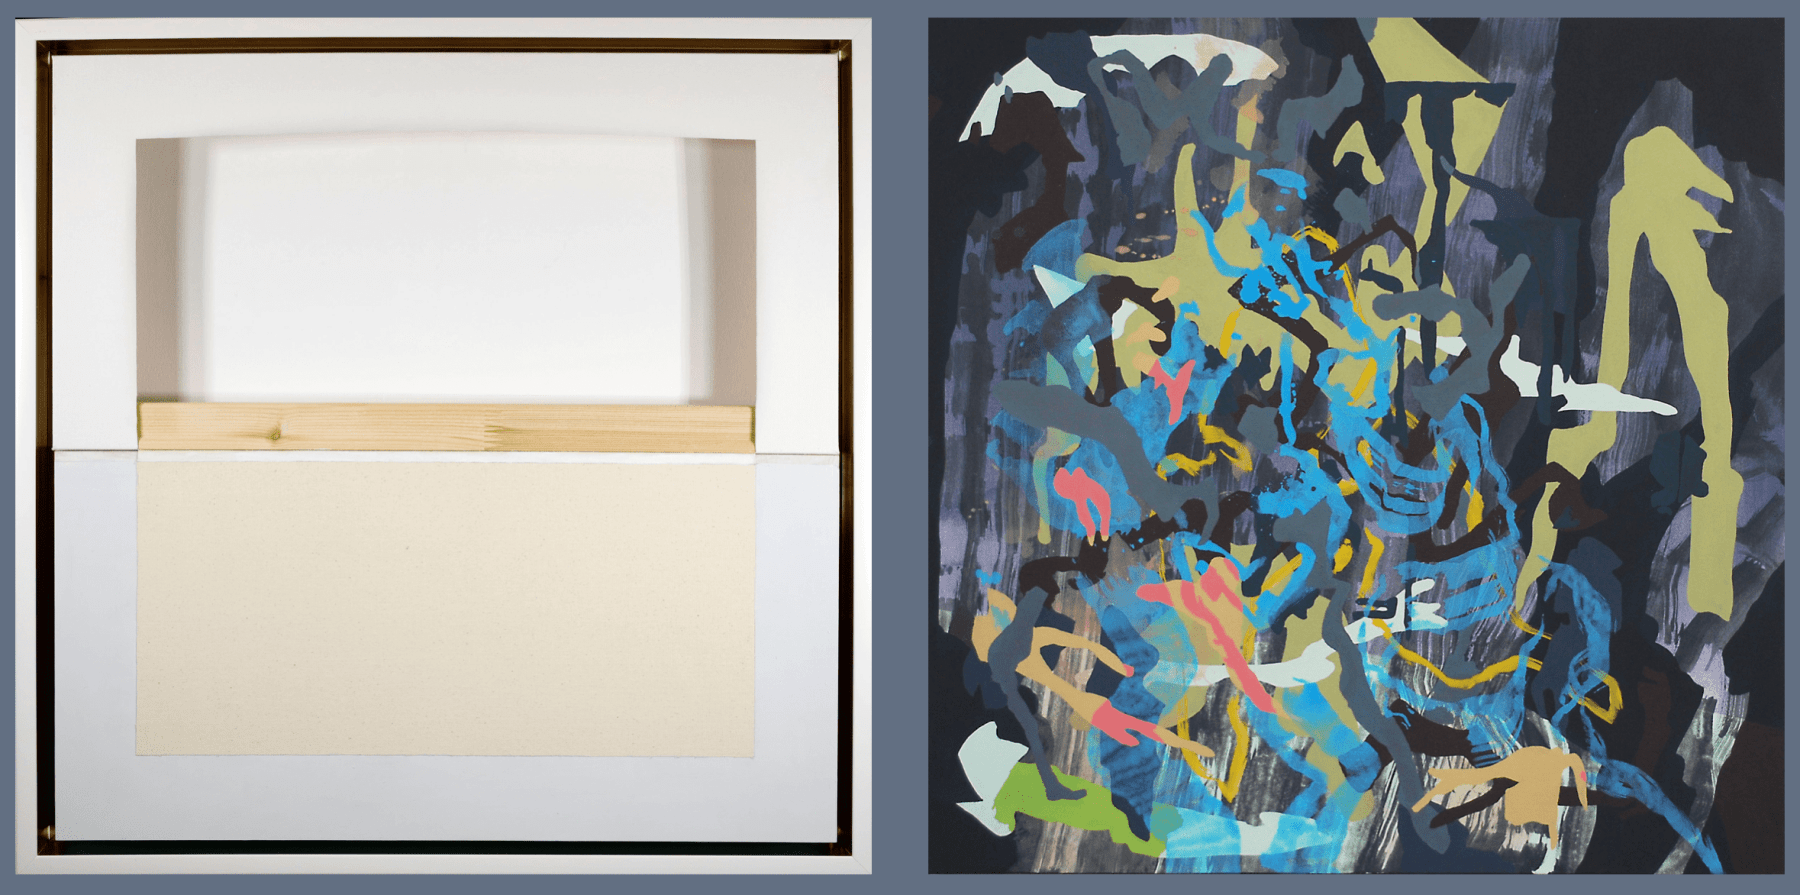 L: Dan Tague,&nbsp;Event Horizon, 2019, Gesso, wax, and enamel on canvas and wood. 24 x 24 inches, R: Aaron Collier,&nbsp;Of the Rocks, 2018, Flashe on canvas, 36 x 36 inches